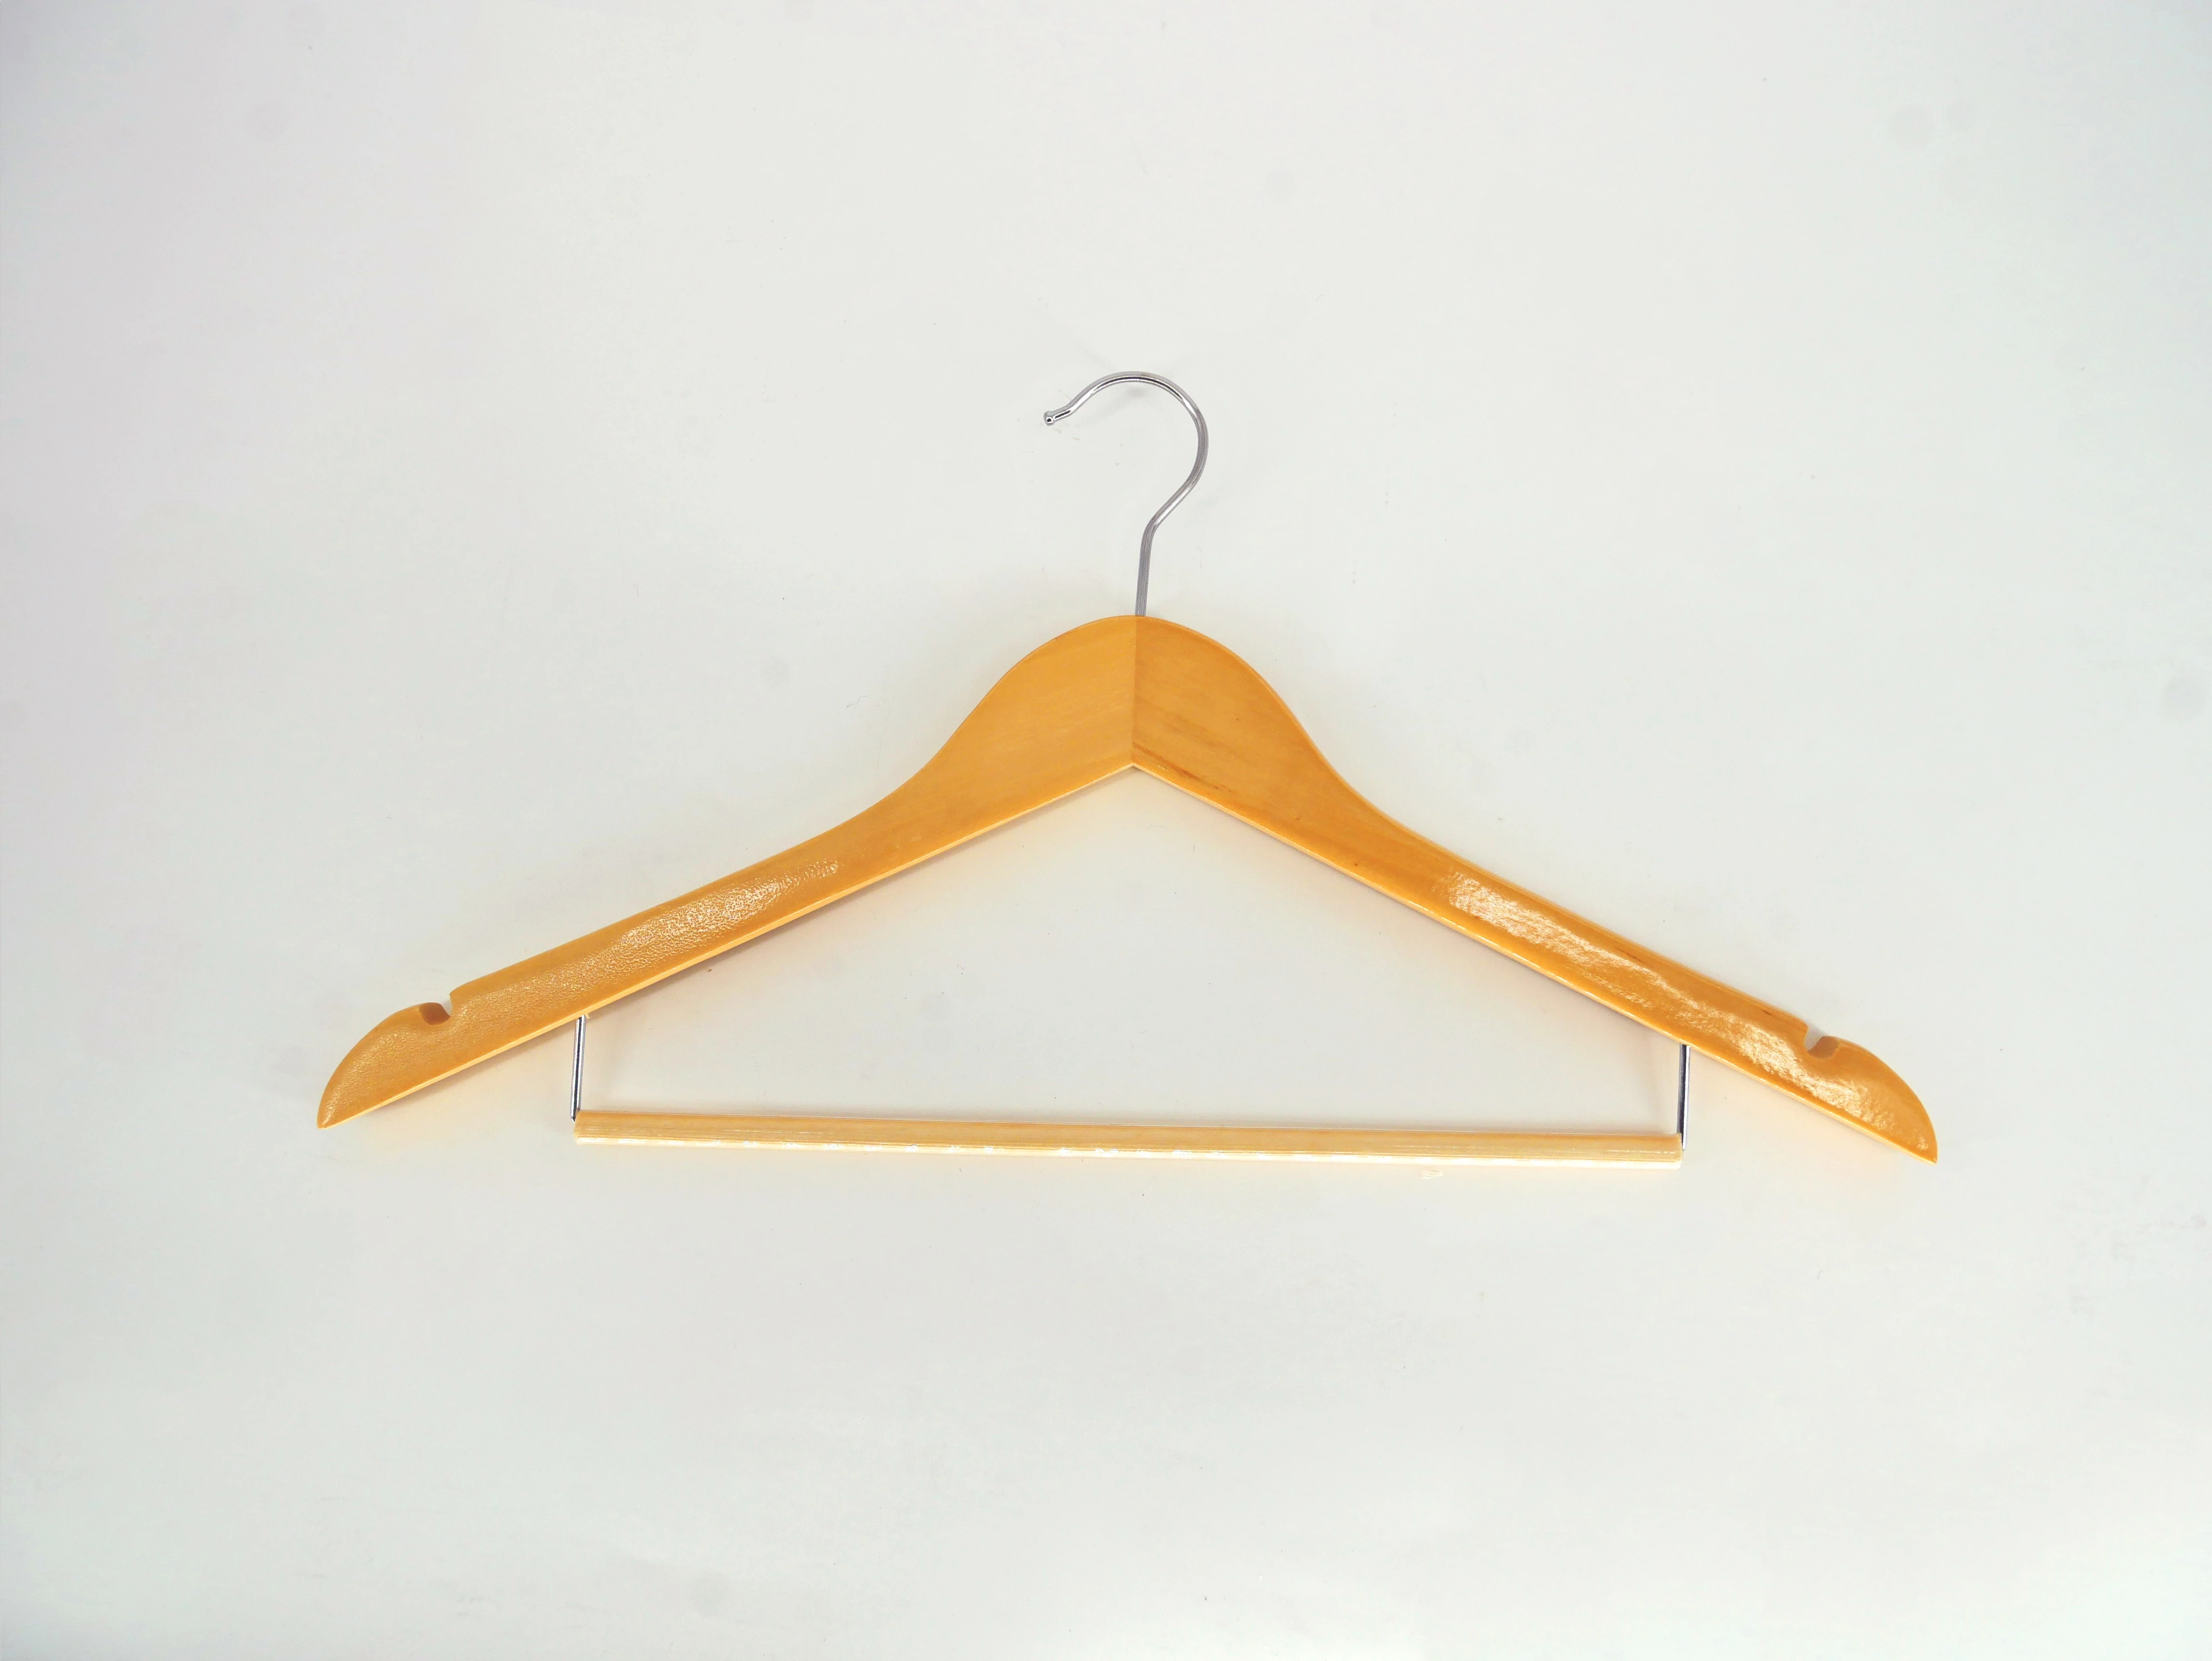 Quality Hangers Wooden Hangers Sturdy Suit Coat Hangers with Locking Bar Glossy Natural Wood